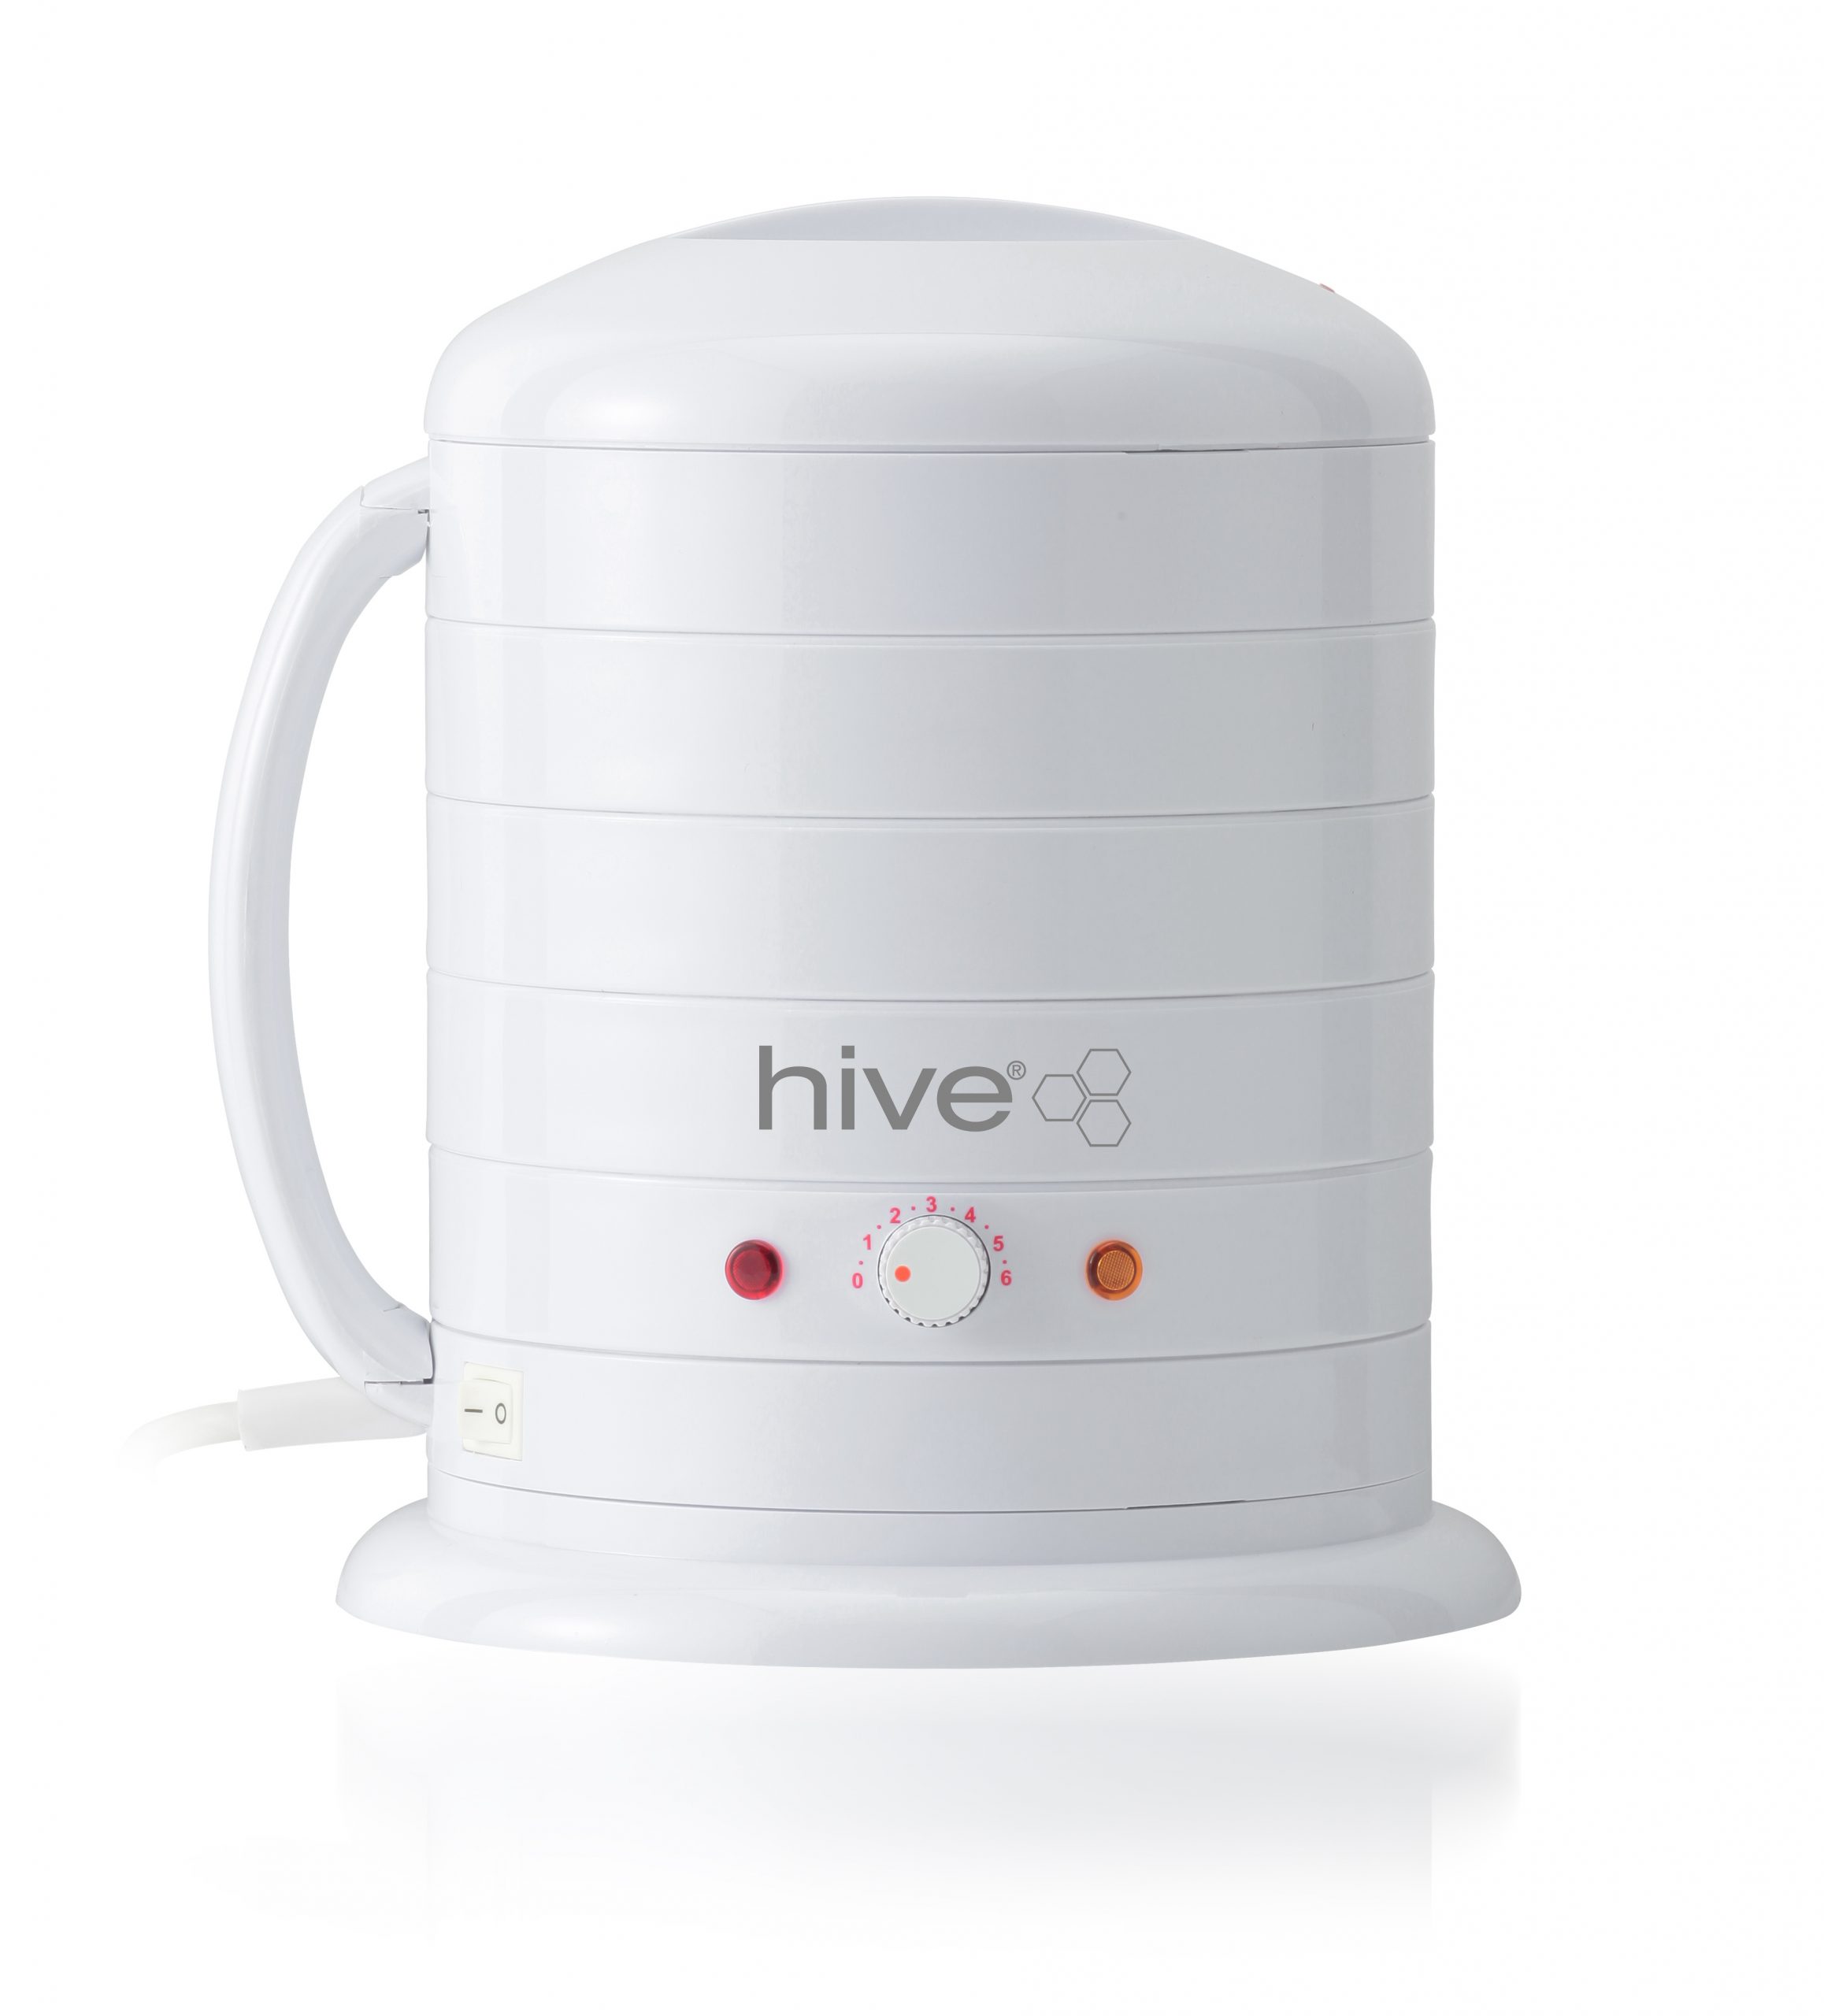 Hive 'No. 1' Wax Heater. Suitable for the heating of warm, crème and hot wax for depilatory hair removal and paraffin waxes for paraffin heat therapy treatments.